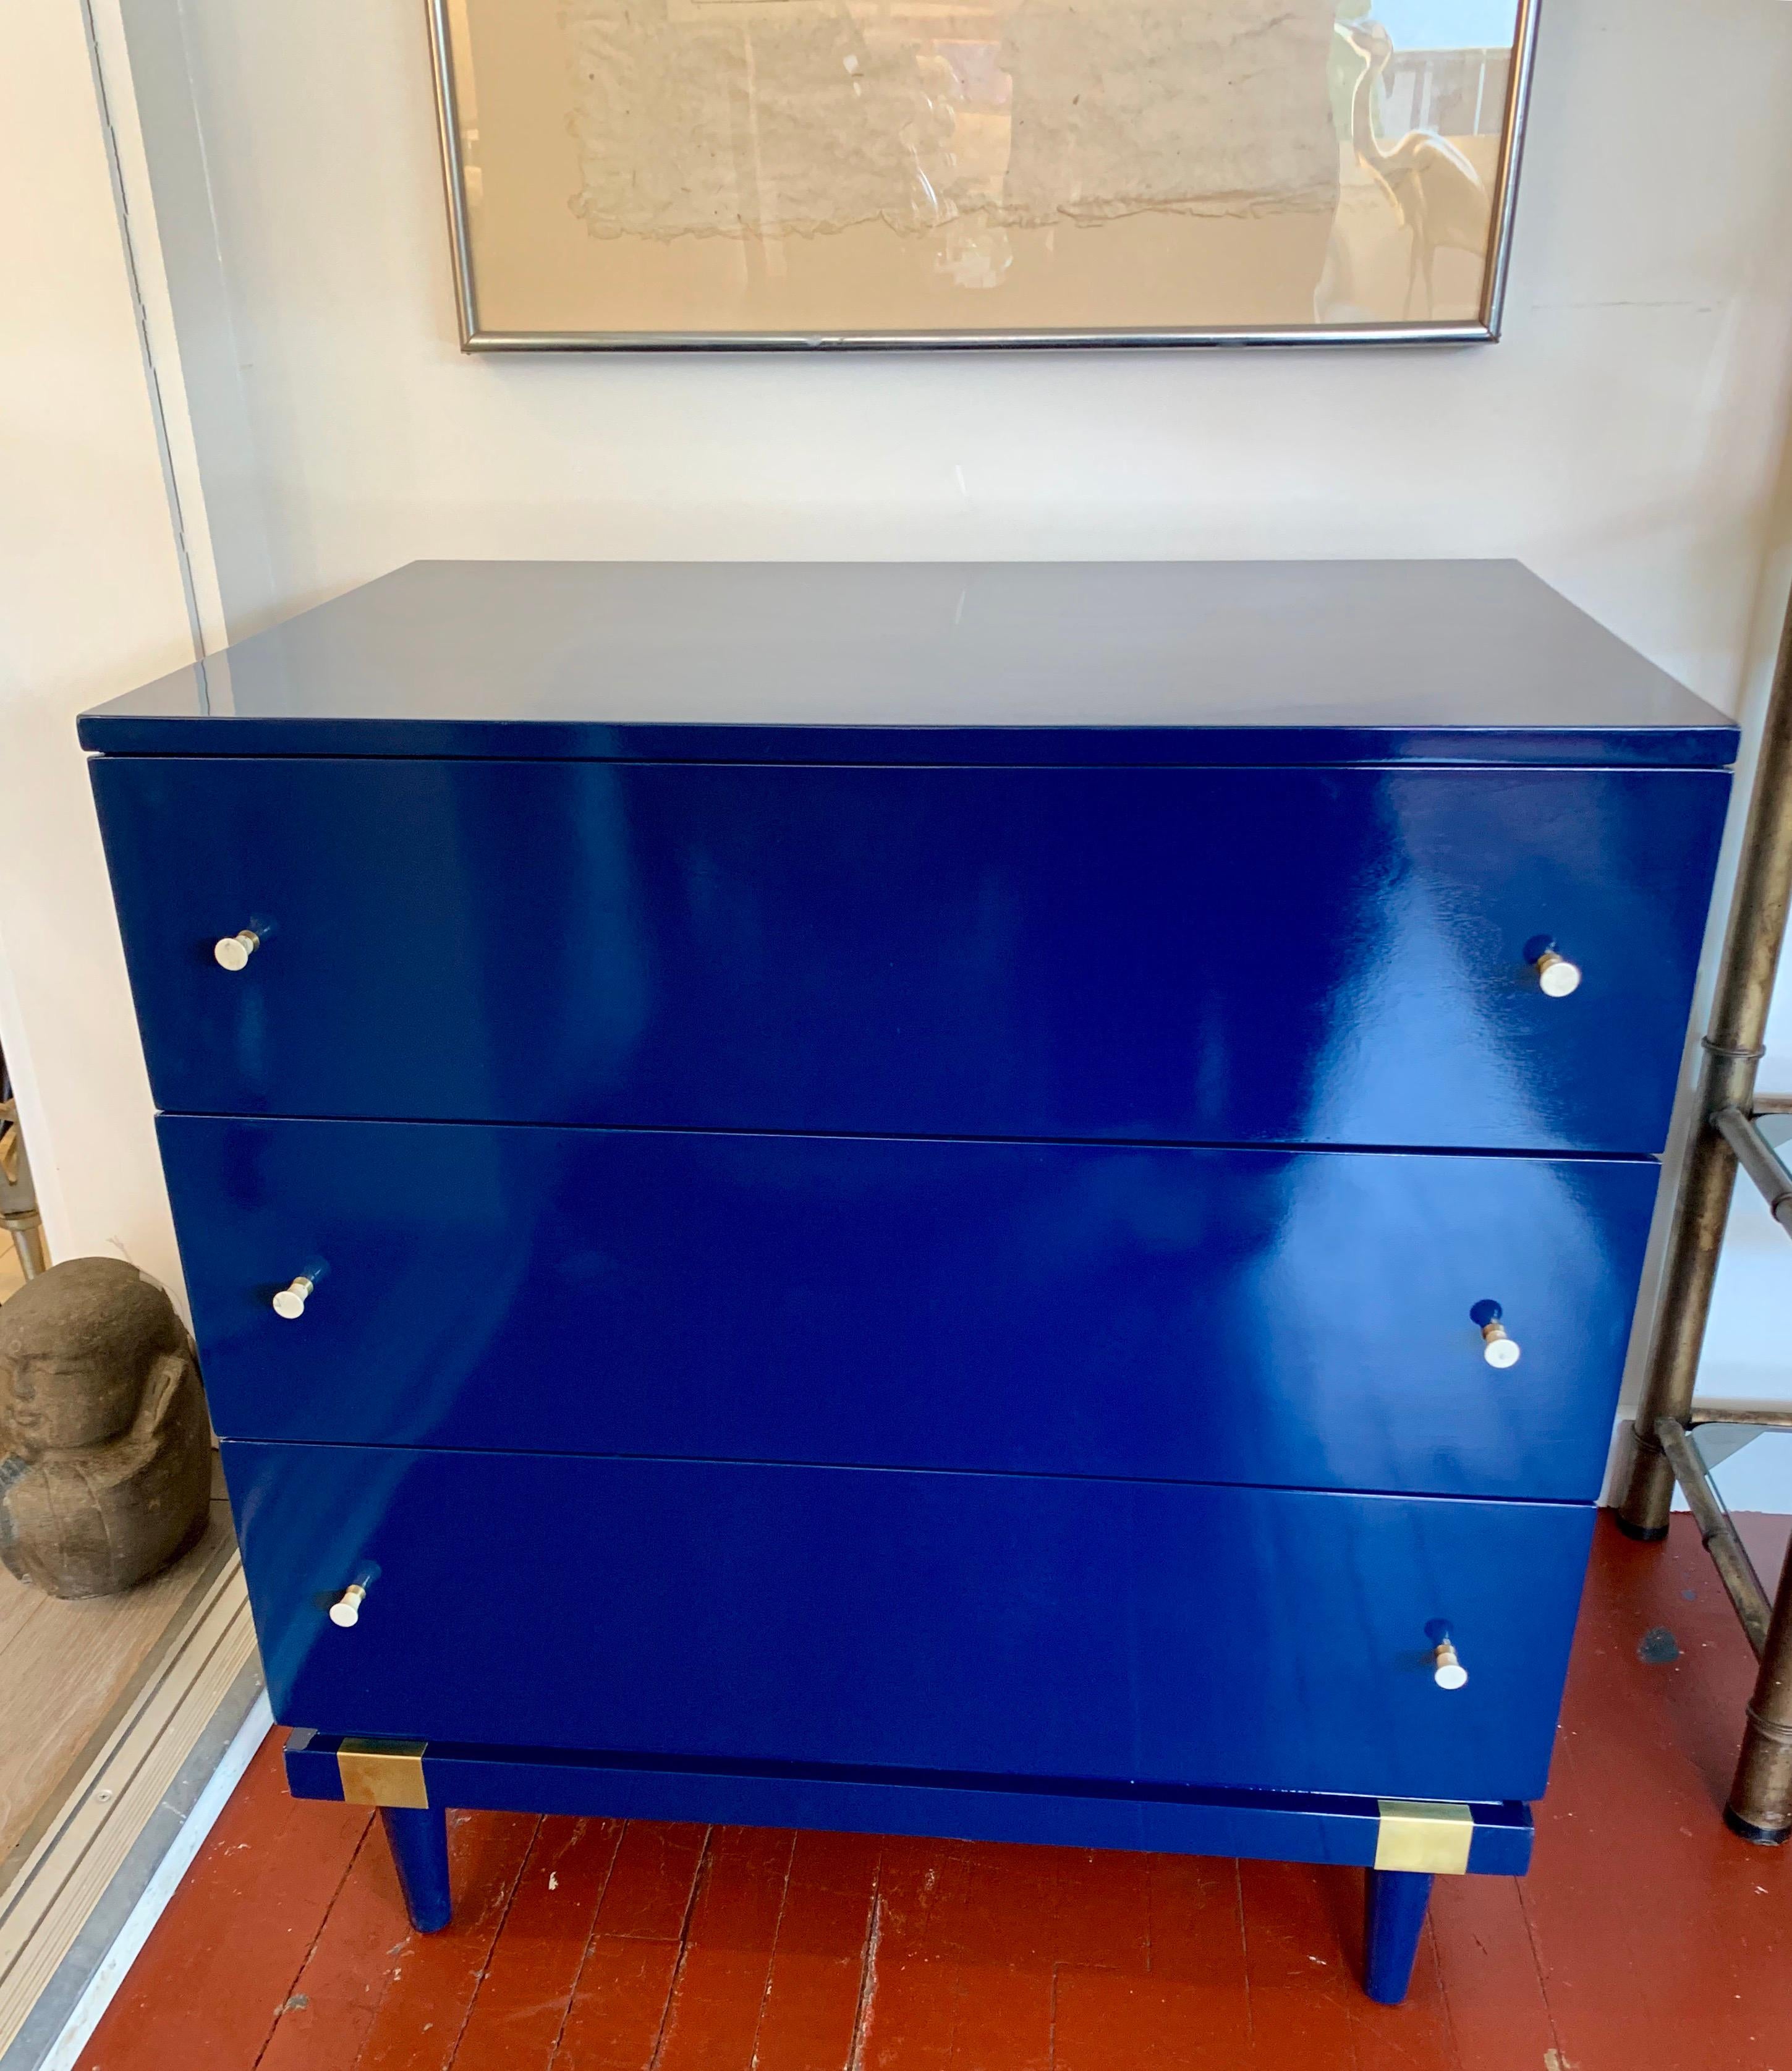 Newly refurbished pair of matching lacquered Raymond Loewy designed small chests of drawers.
The color is a deep blue with gold accents. They are nothing short of magnificent.